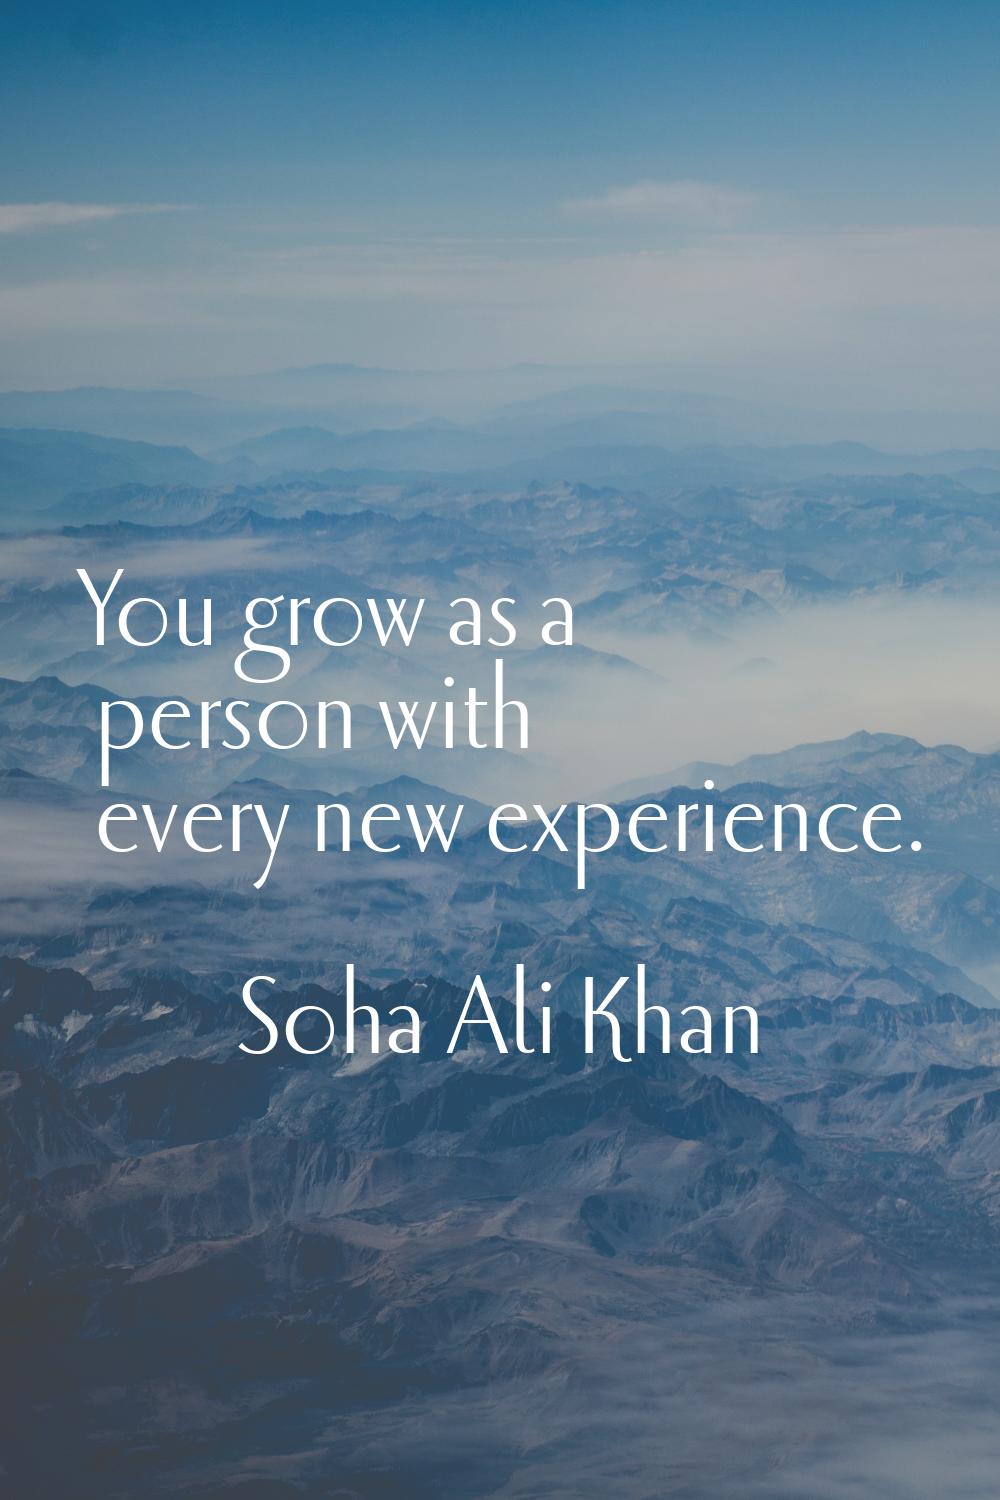 You grow as a person with every new experience.